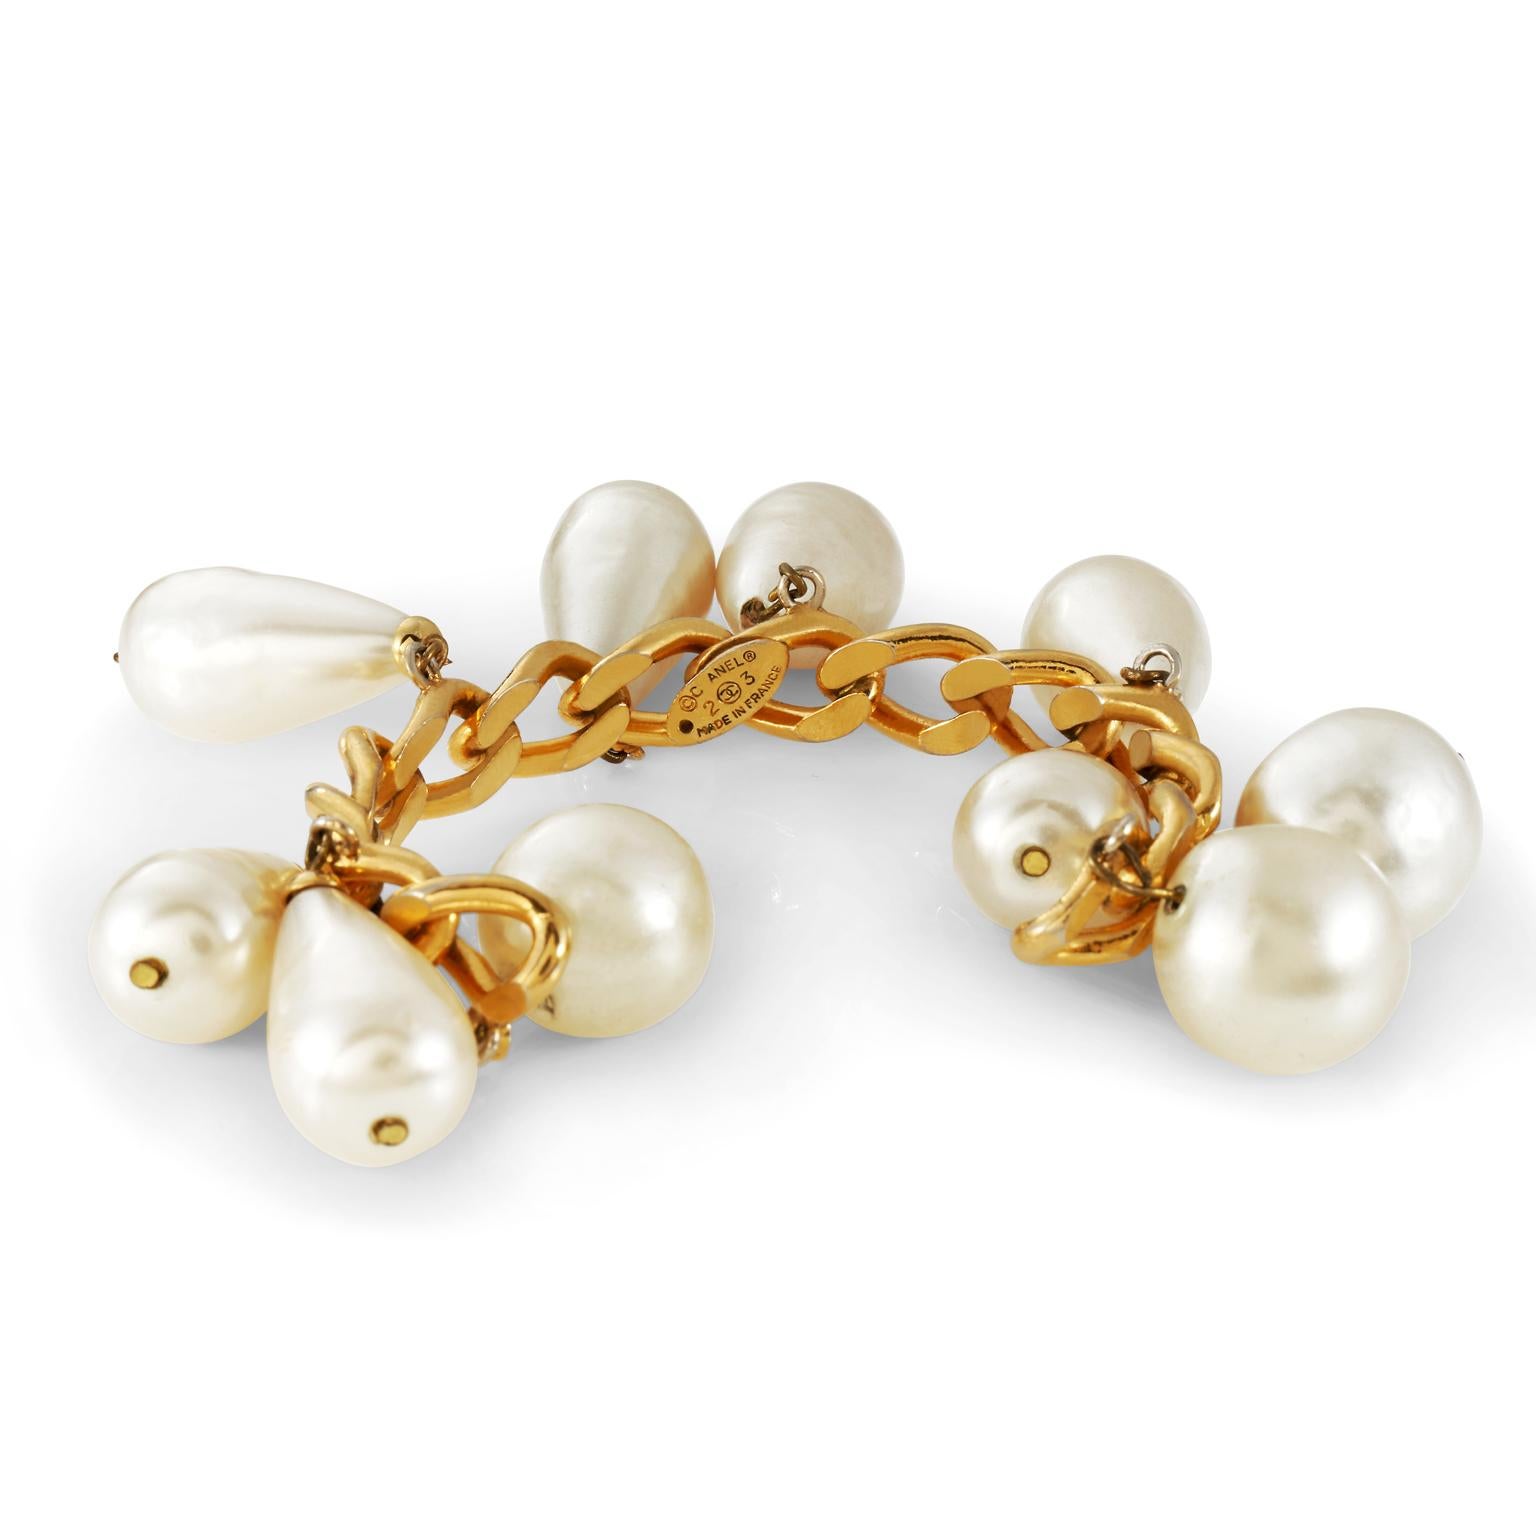 This authentic Chanel Gold Pearl Drop Cuff is in very good vintage condition from the mid 80’s.  Faux pearls dangle from a cuff of substantial gold links.  Open cuff style. Made in France.  Pouch or box included.

